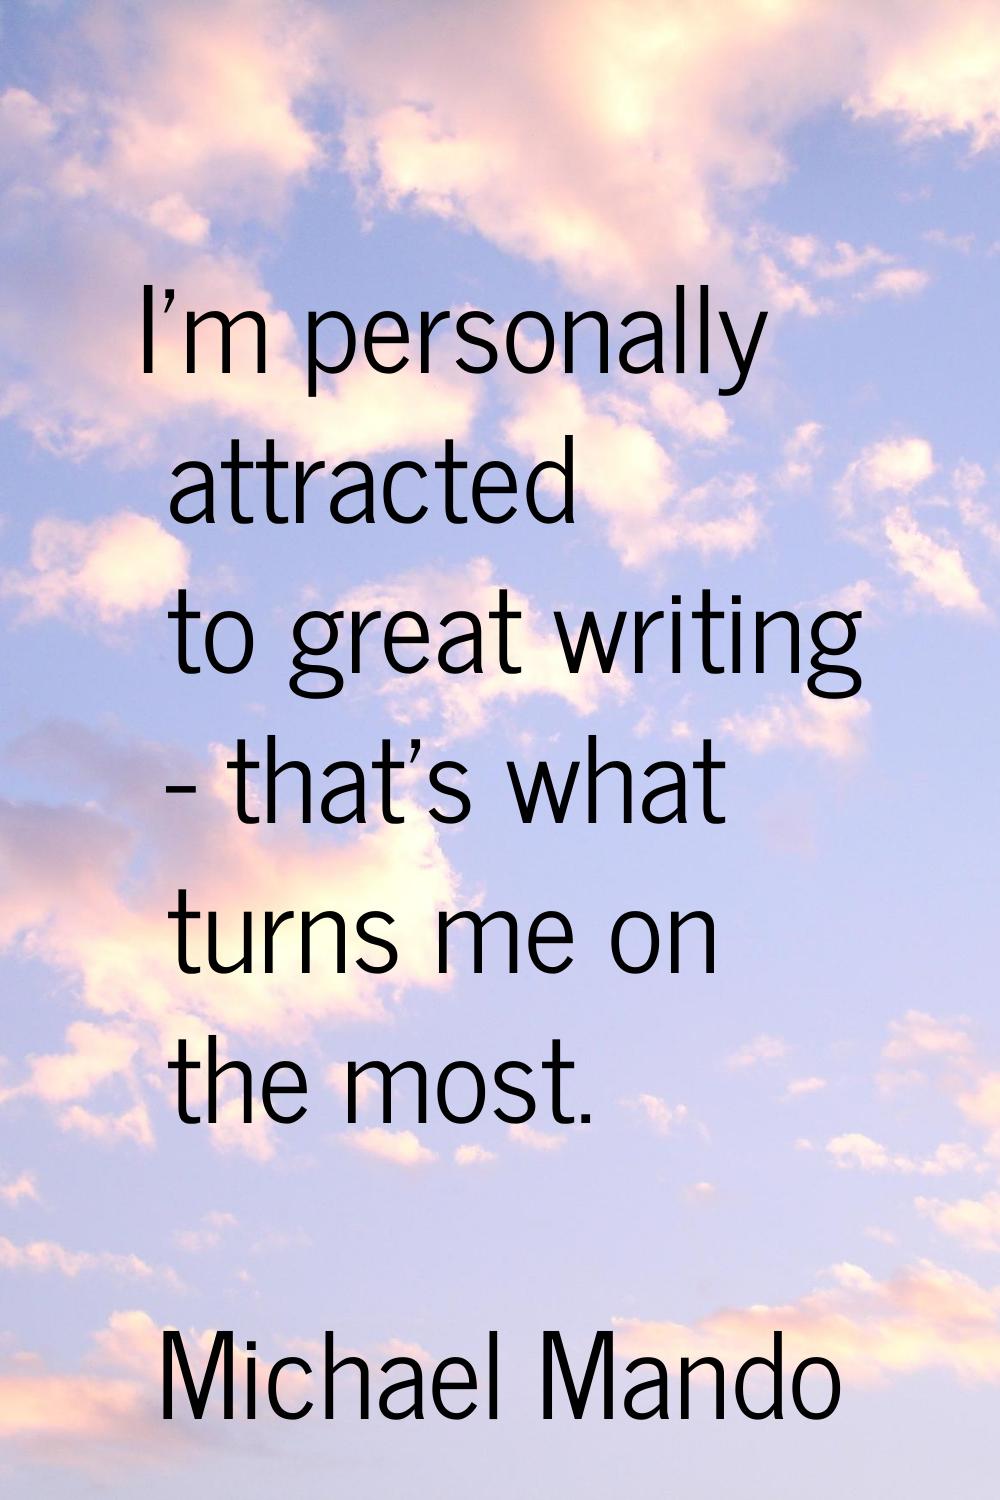 I'm personally attracted to great writing - that's what turns me on the most.